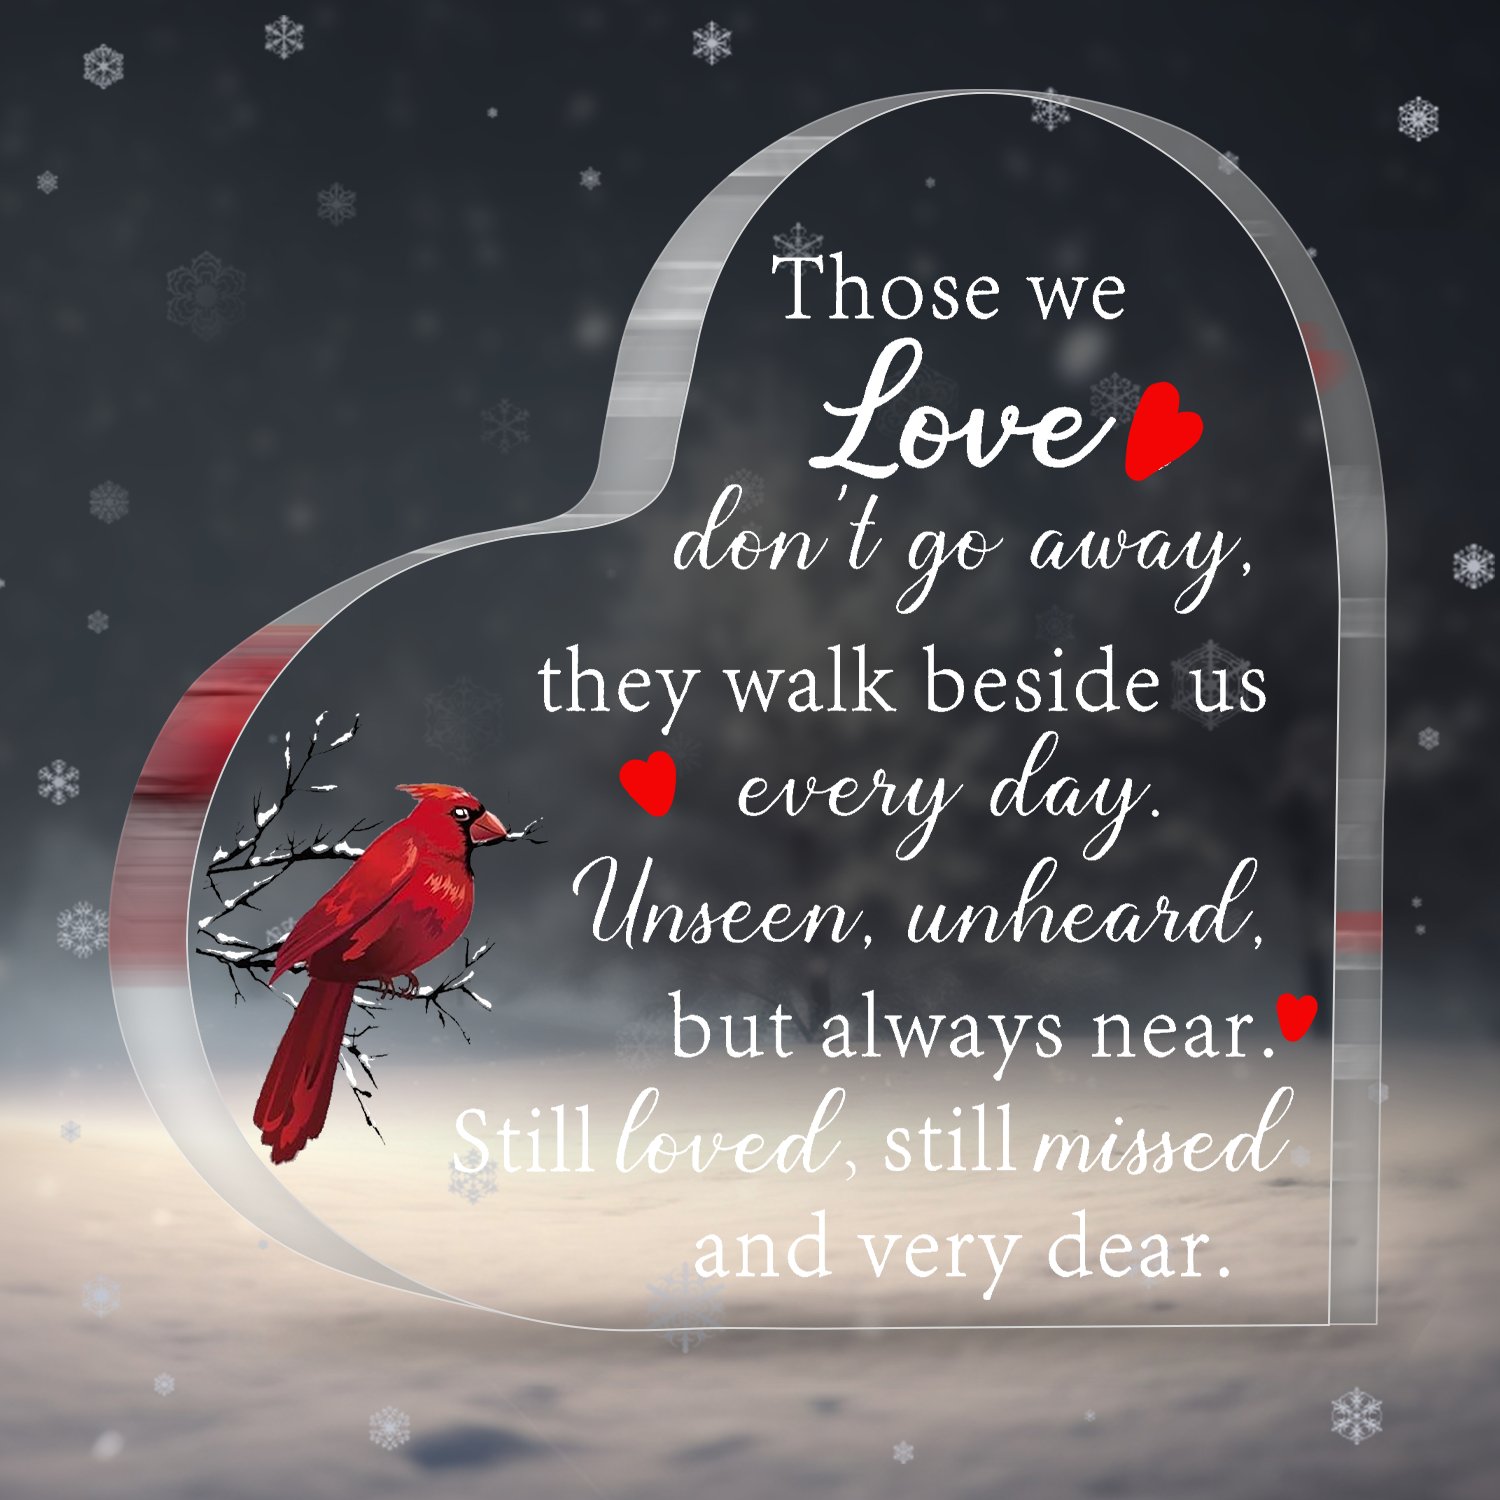 Those We Love Don't Go Away Memorial Gifts Sympathy Gifts Red Cardinal Memorial Bereavement Acrylic Heart Plaque Condolence Gifts in Memory of Loss of Loved One